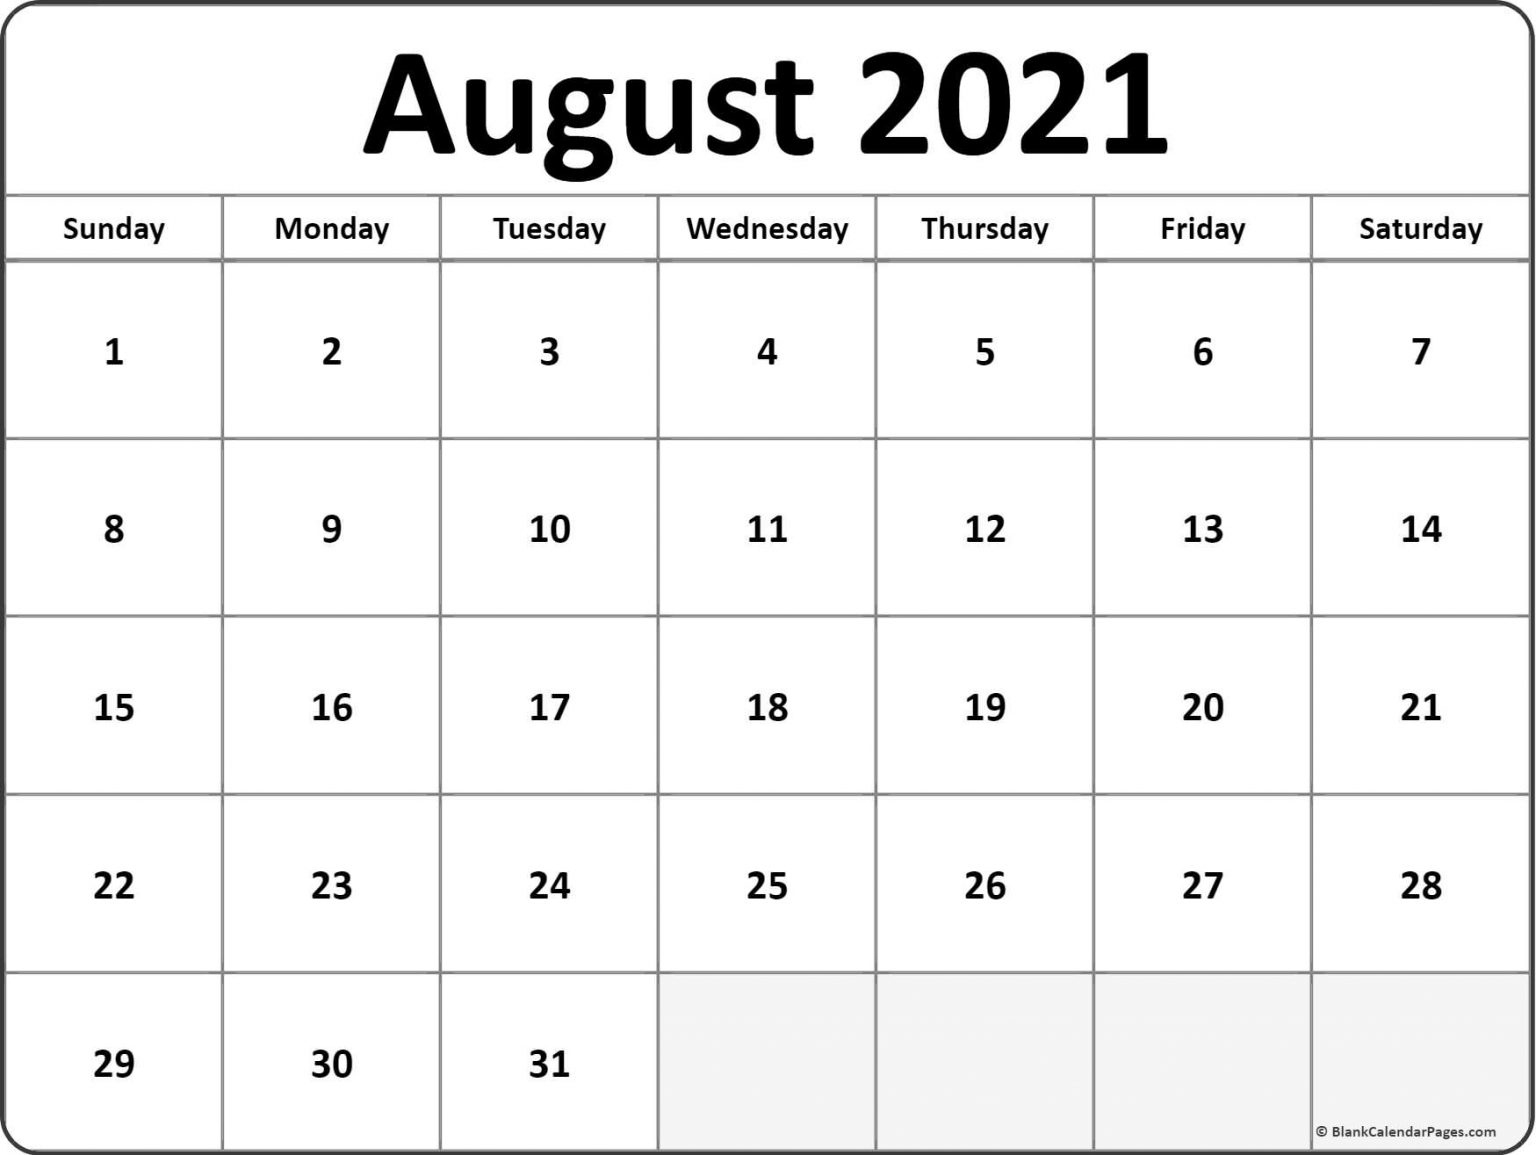 August 2021 Calendar Free Printable Monthly Calendars - Calendar Template 2021 August 2020-August 2021 Calendar